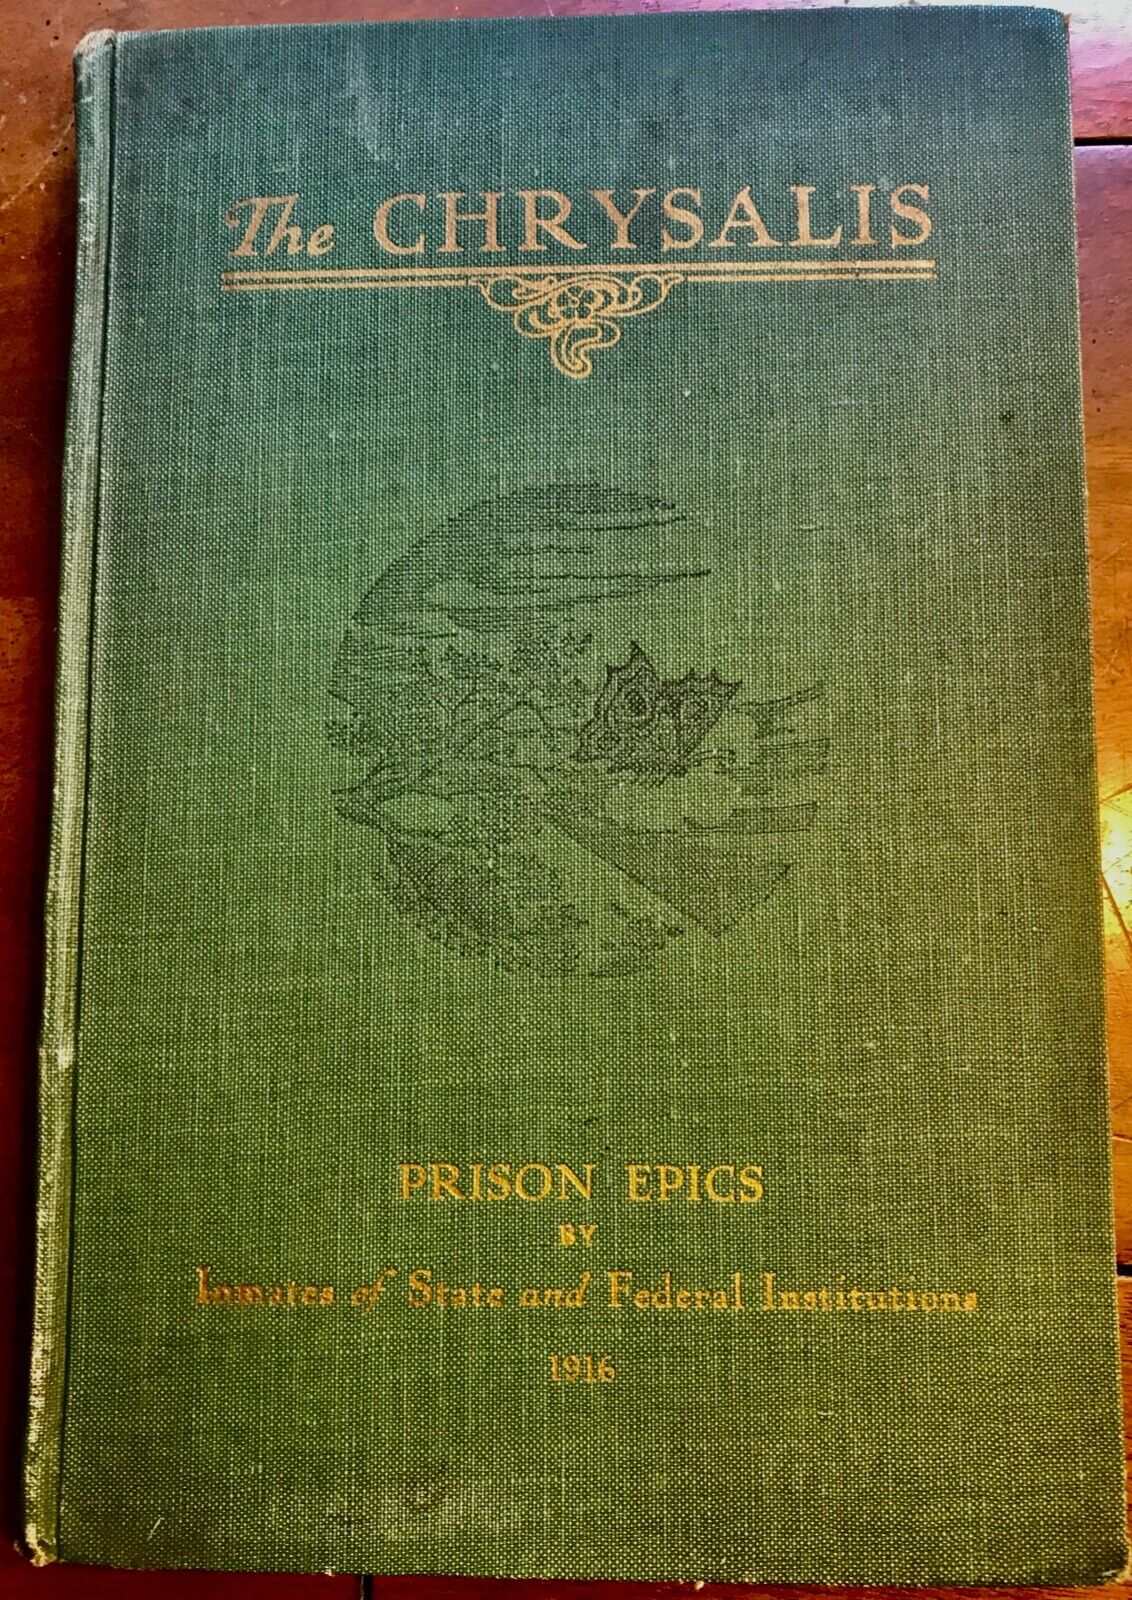 THE CHRYSALIS - RARE 1916 1ST. EDITION, STORIES BY FEDERAL PRISONERS